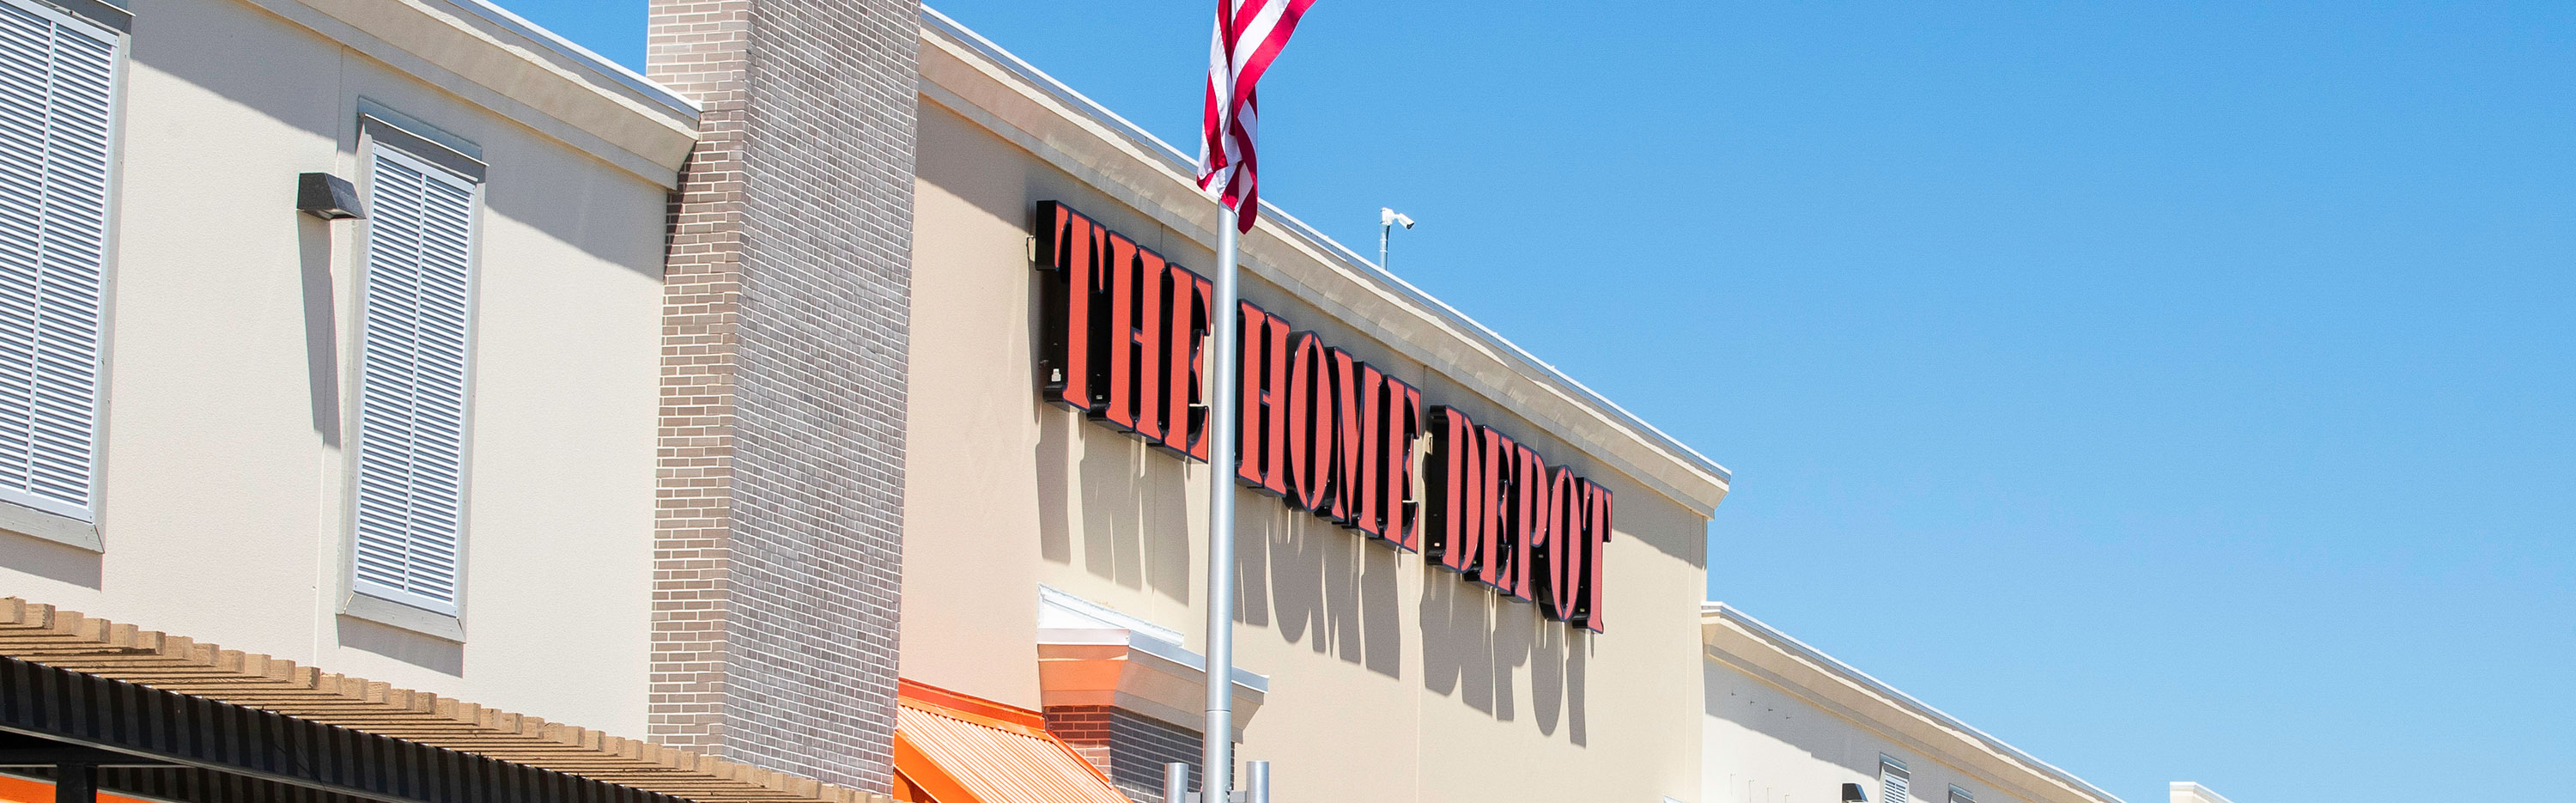 The Home Depot | Newsroom Image_PHASING OUT PRODUCTS CONTAINING PFAS